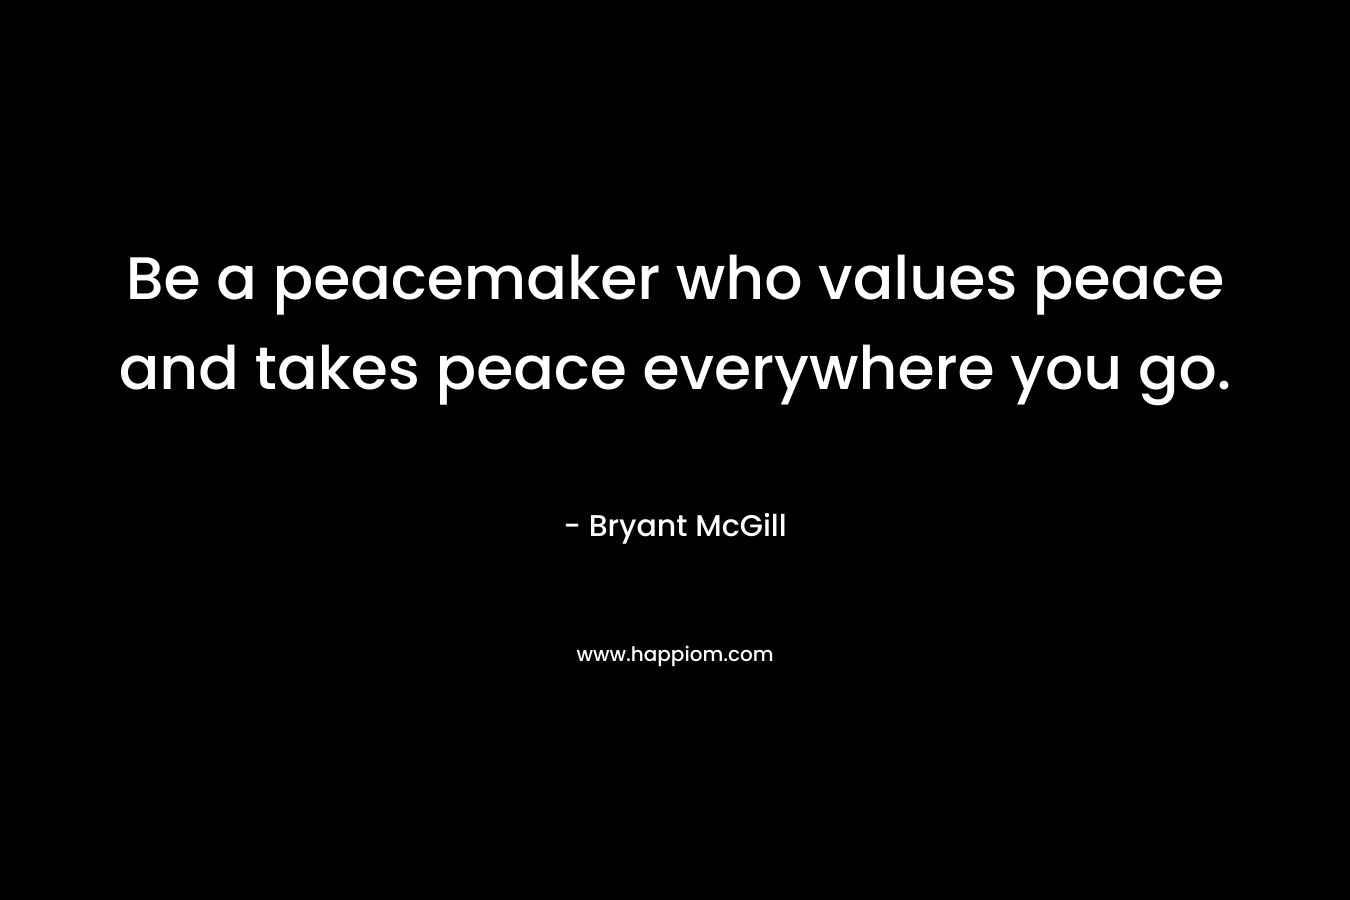 Be a peacemaker who values peace and takes peace everywhere you go. – Bryant McGill